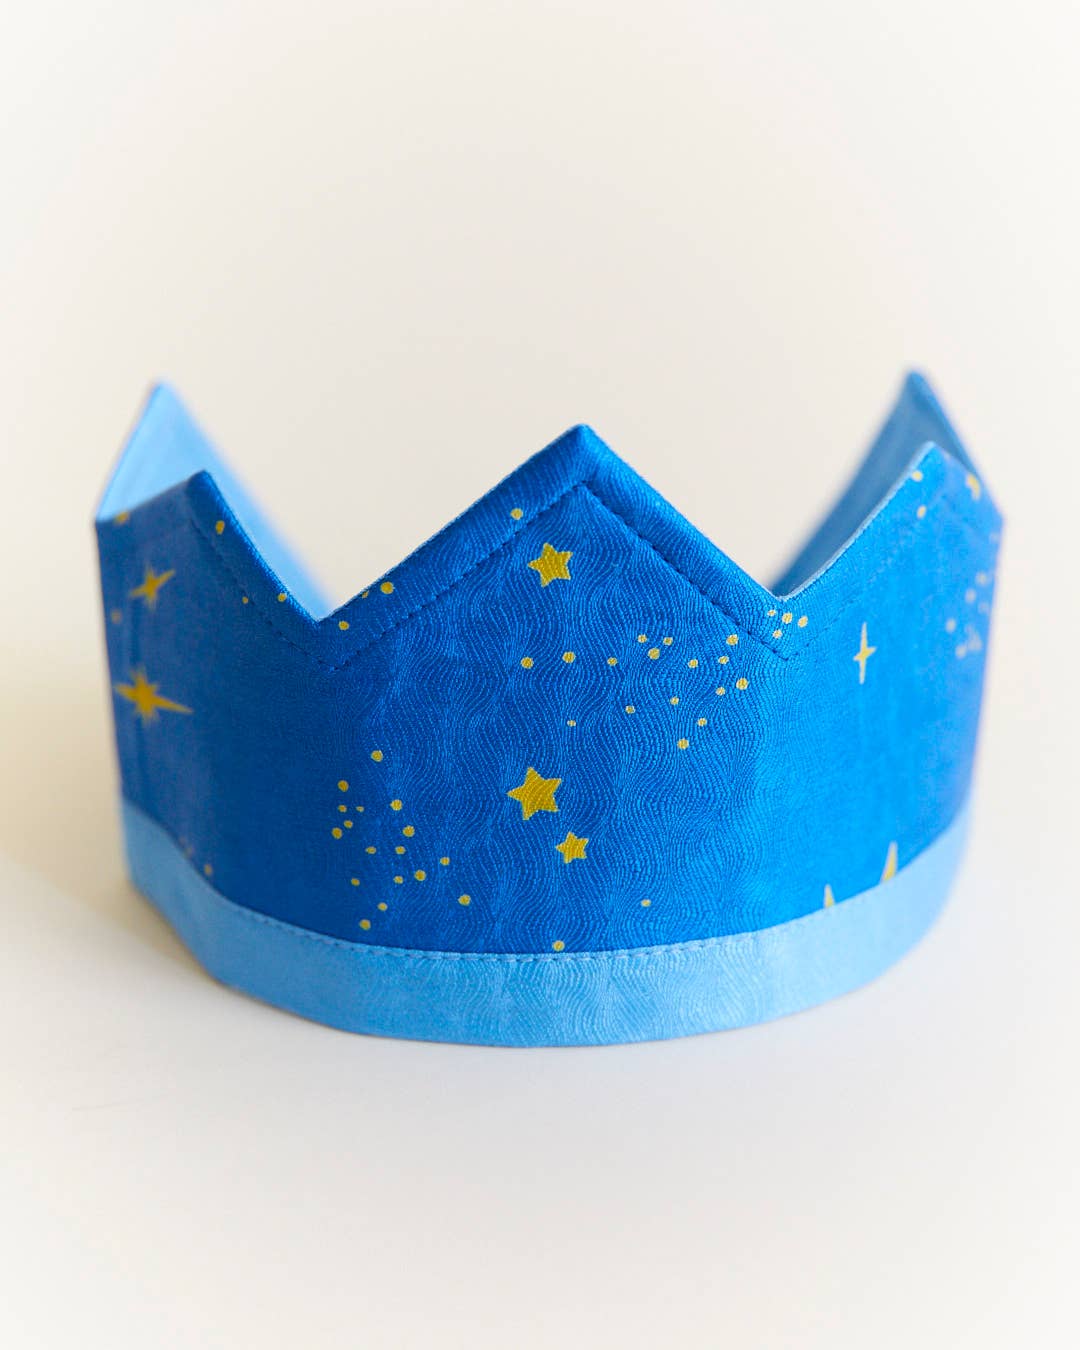 Star Crown for Birthdays and Dress Up